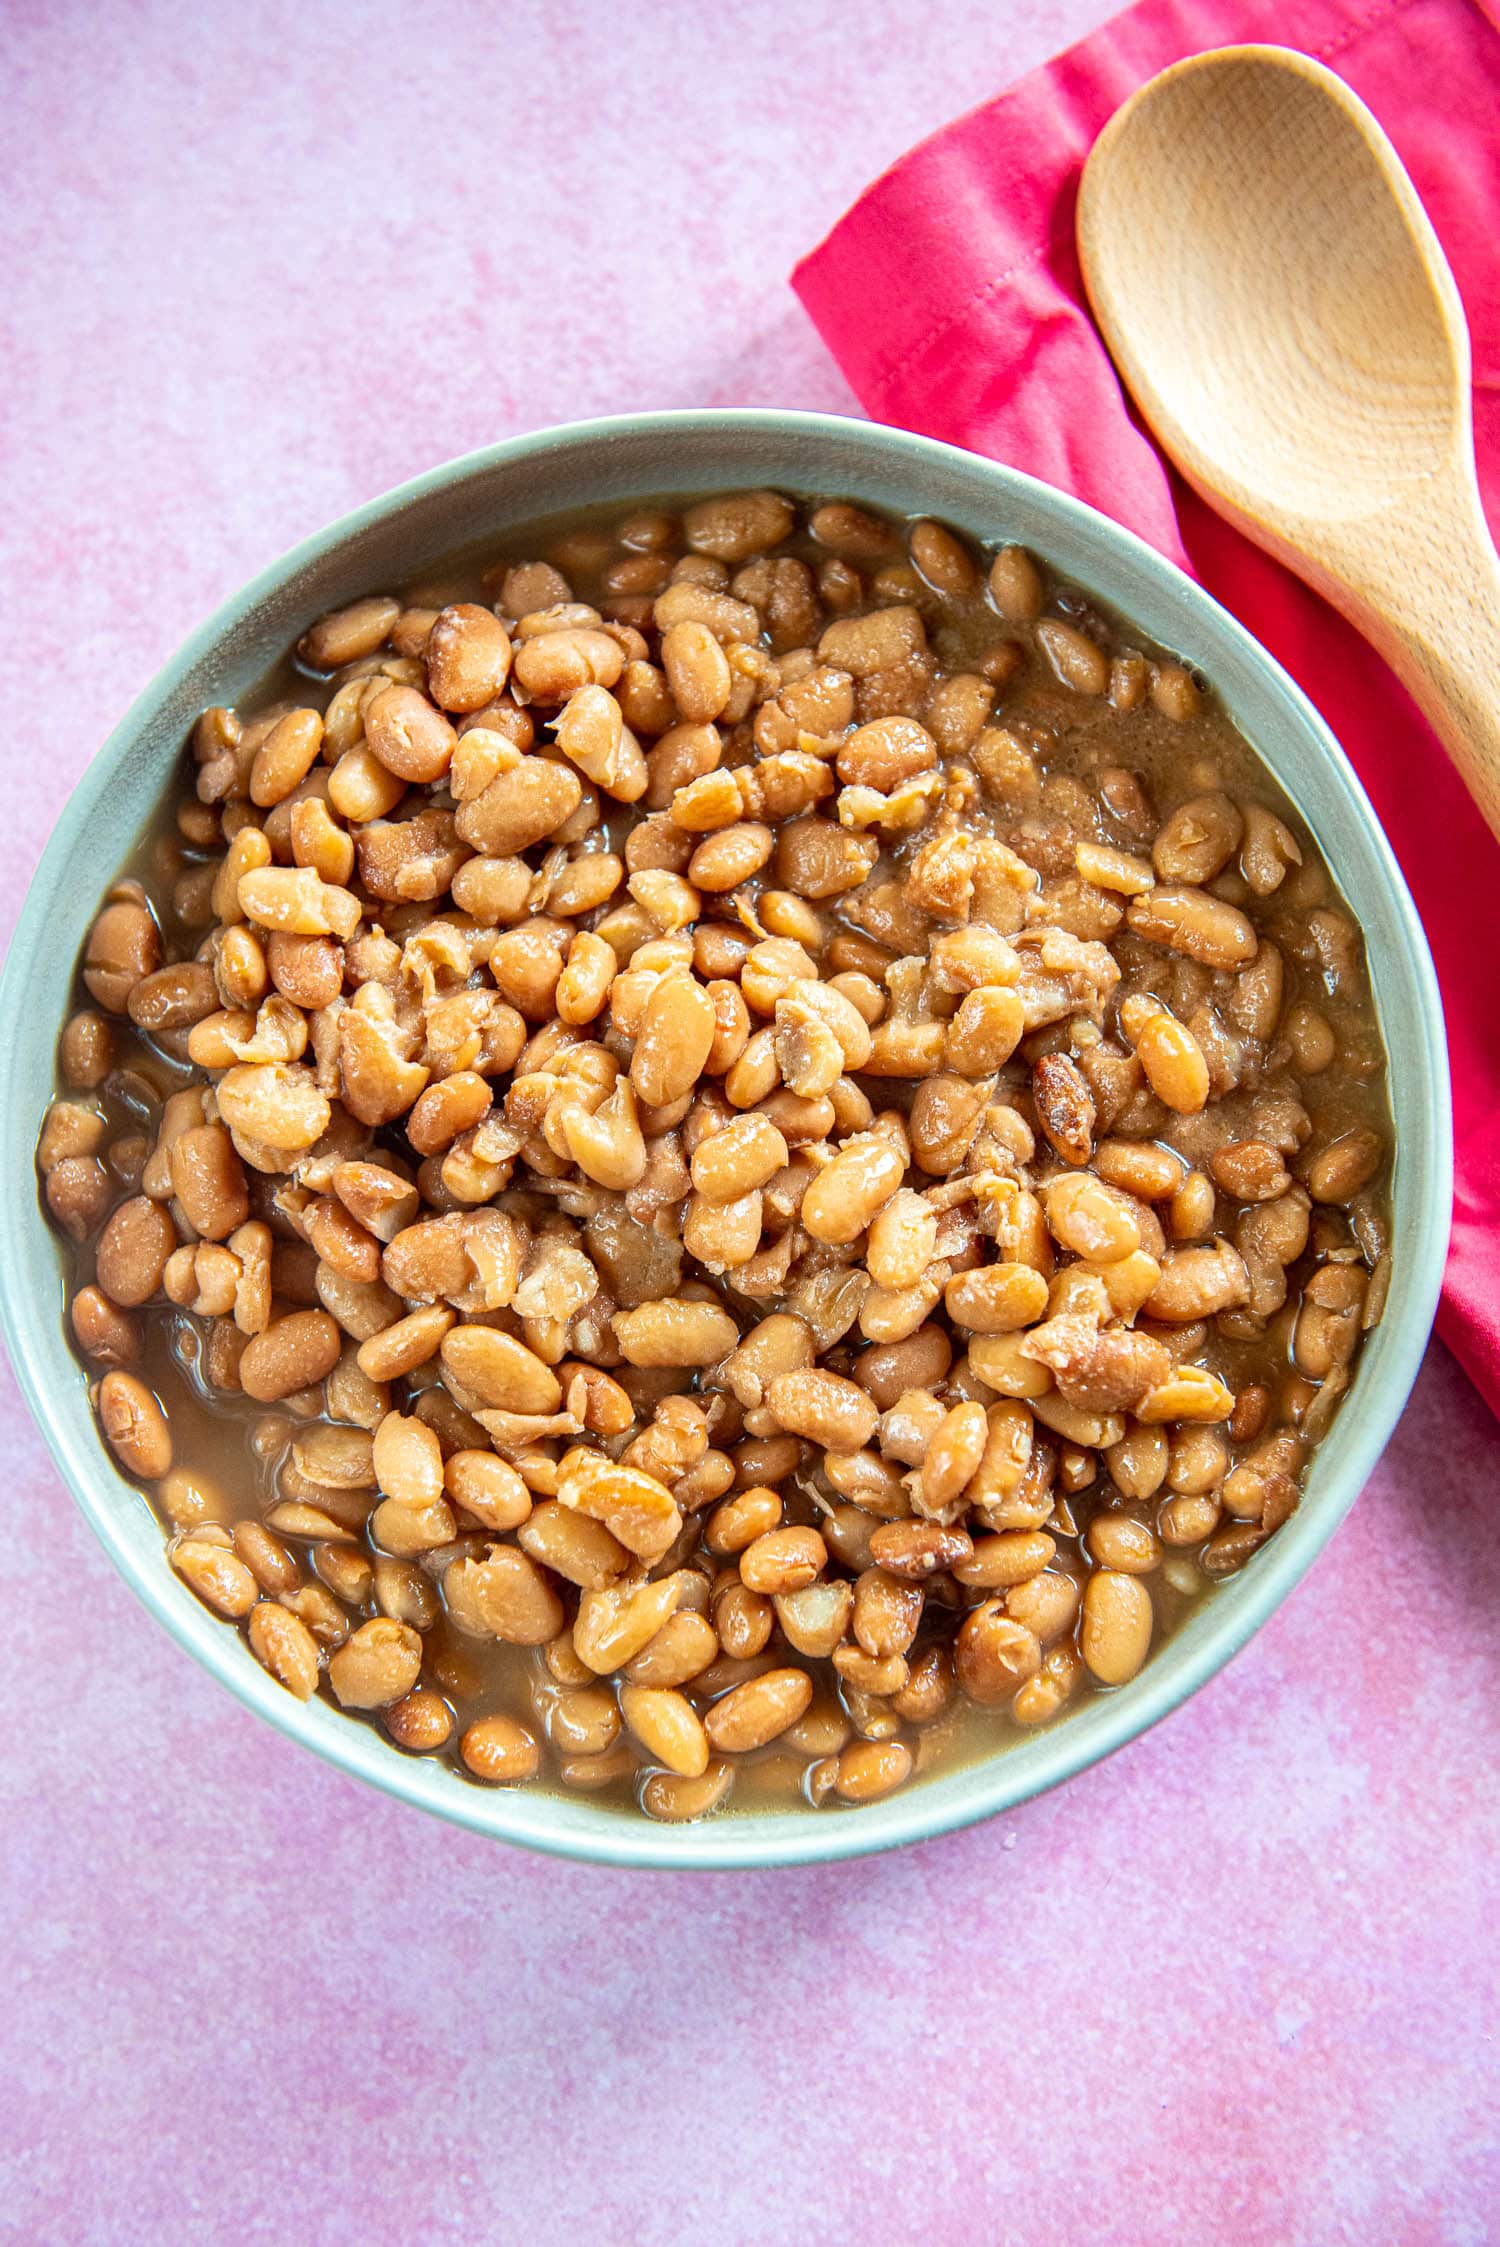 cooked pinto beans in gray serving bowl